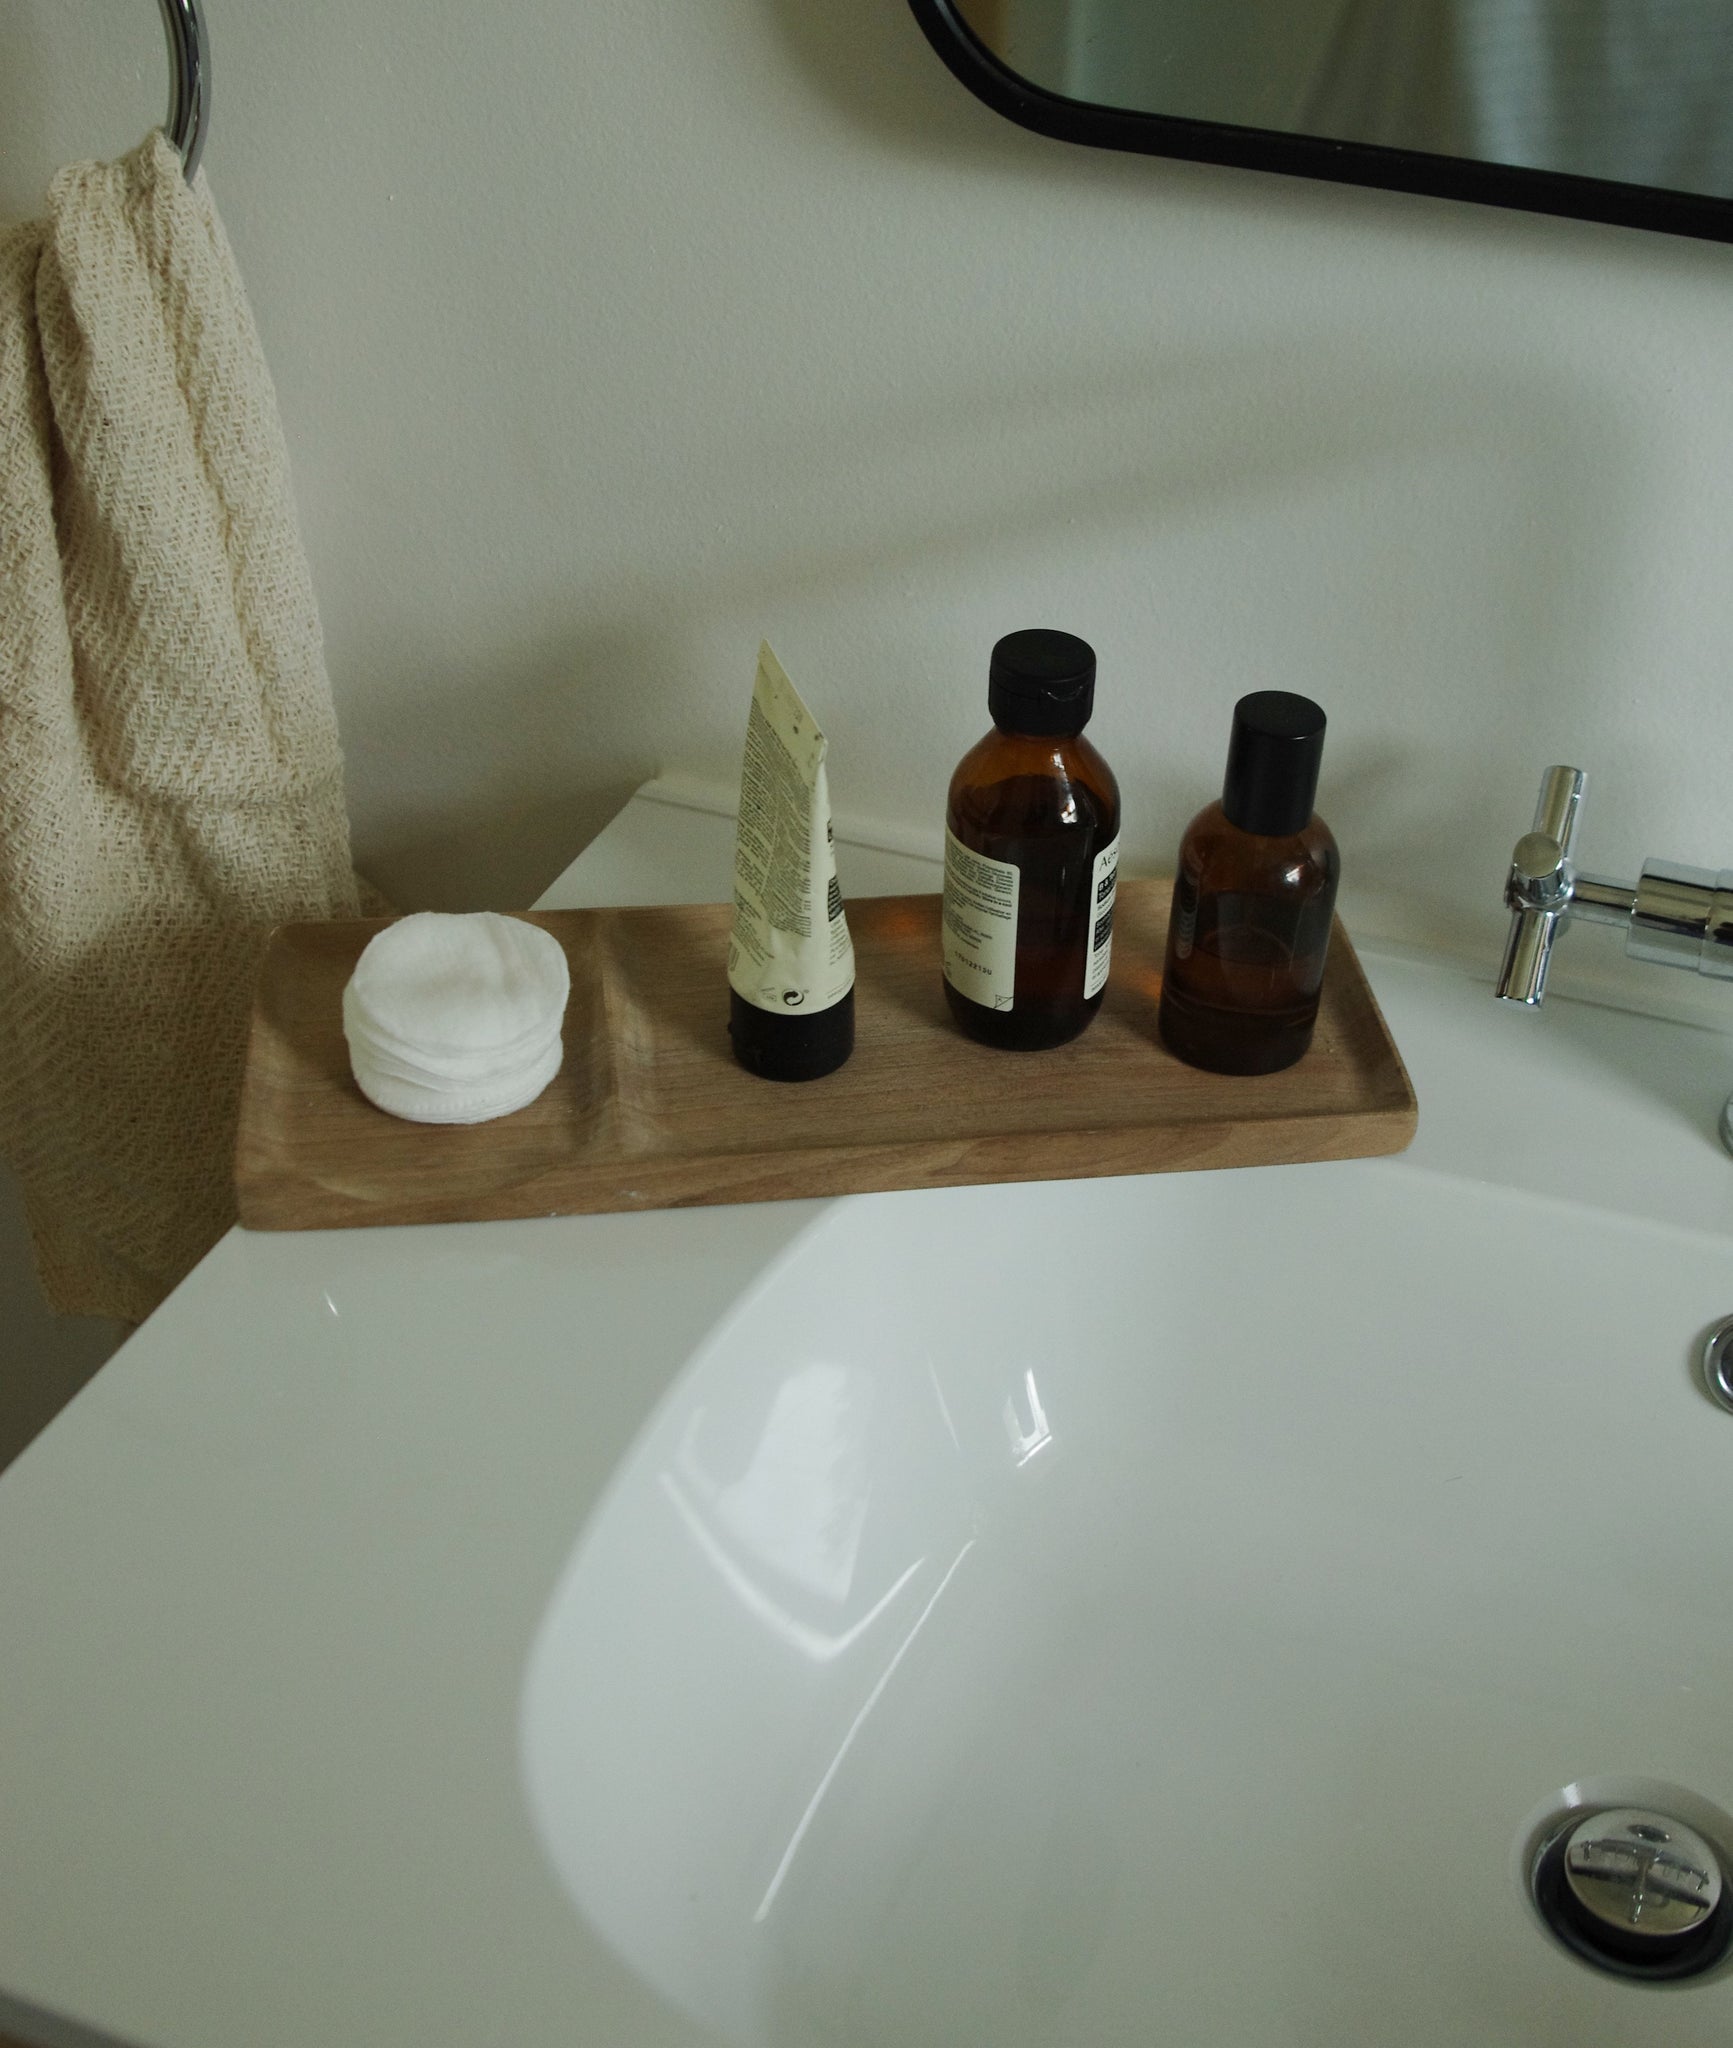 Wooden bathroom tray holding cotton pads and skincare bottles.